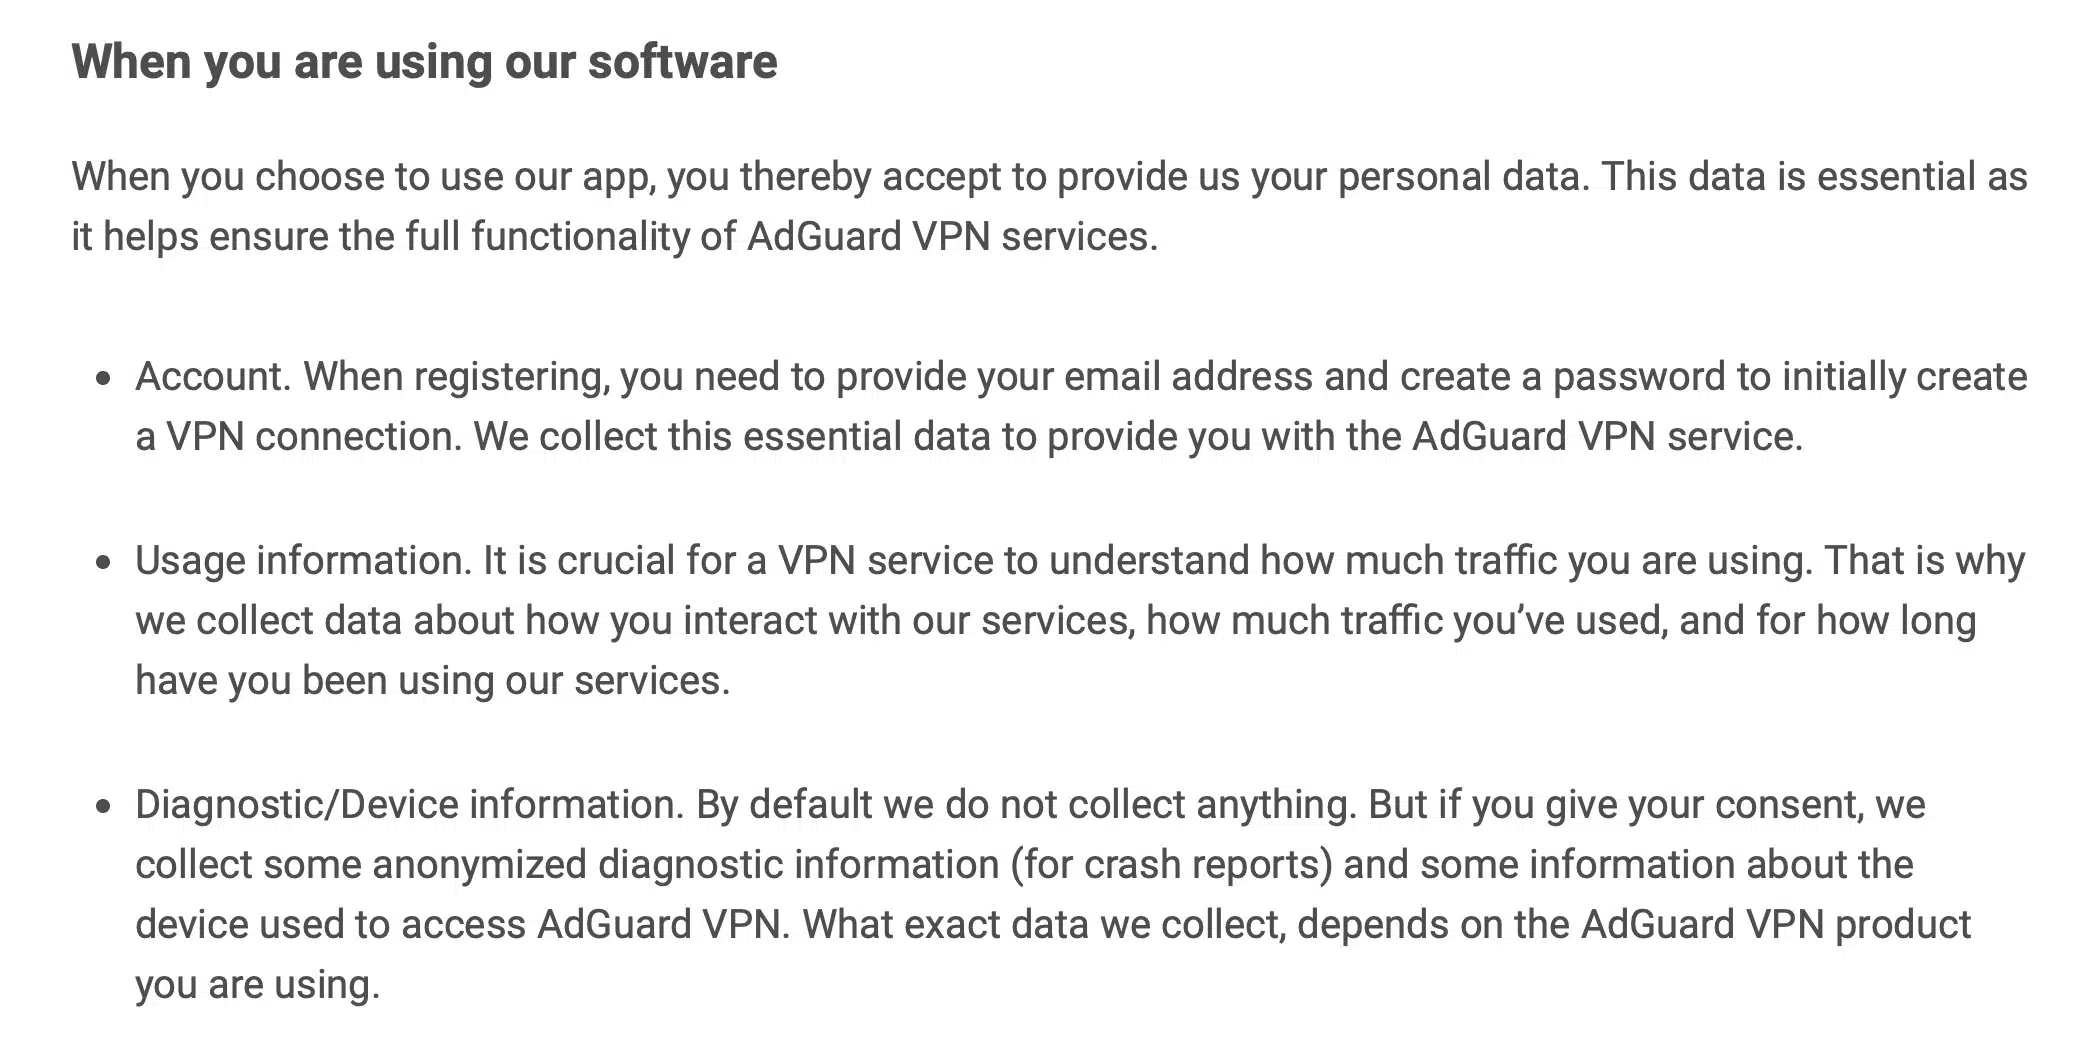 AdGuard_VPN - Privacy Policy 2